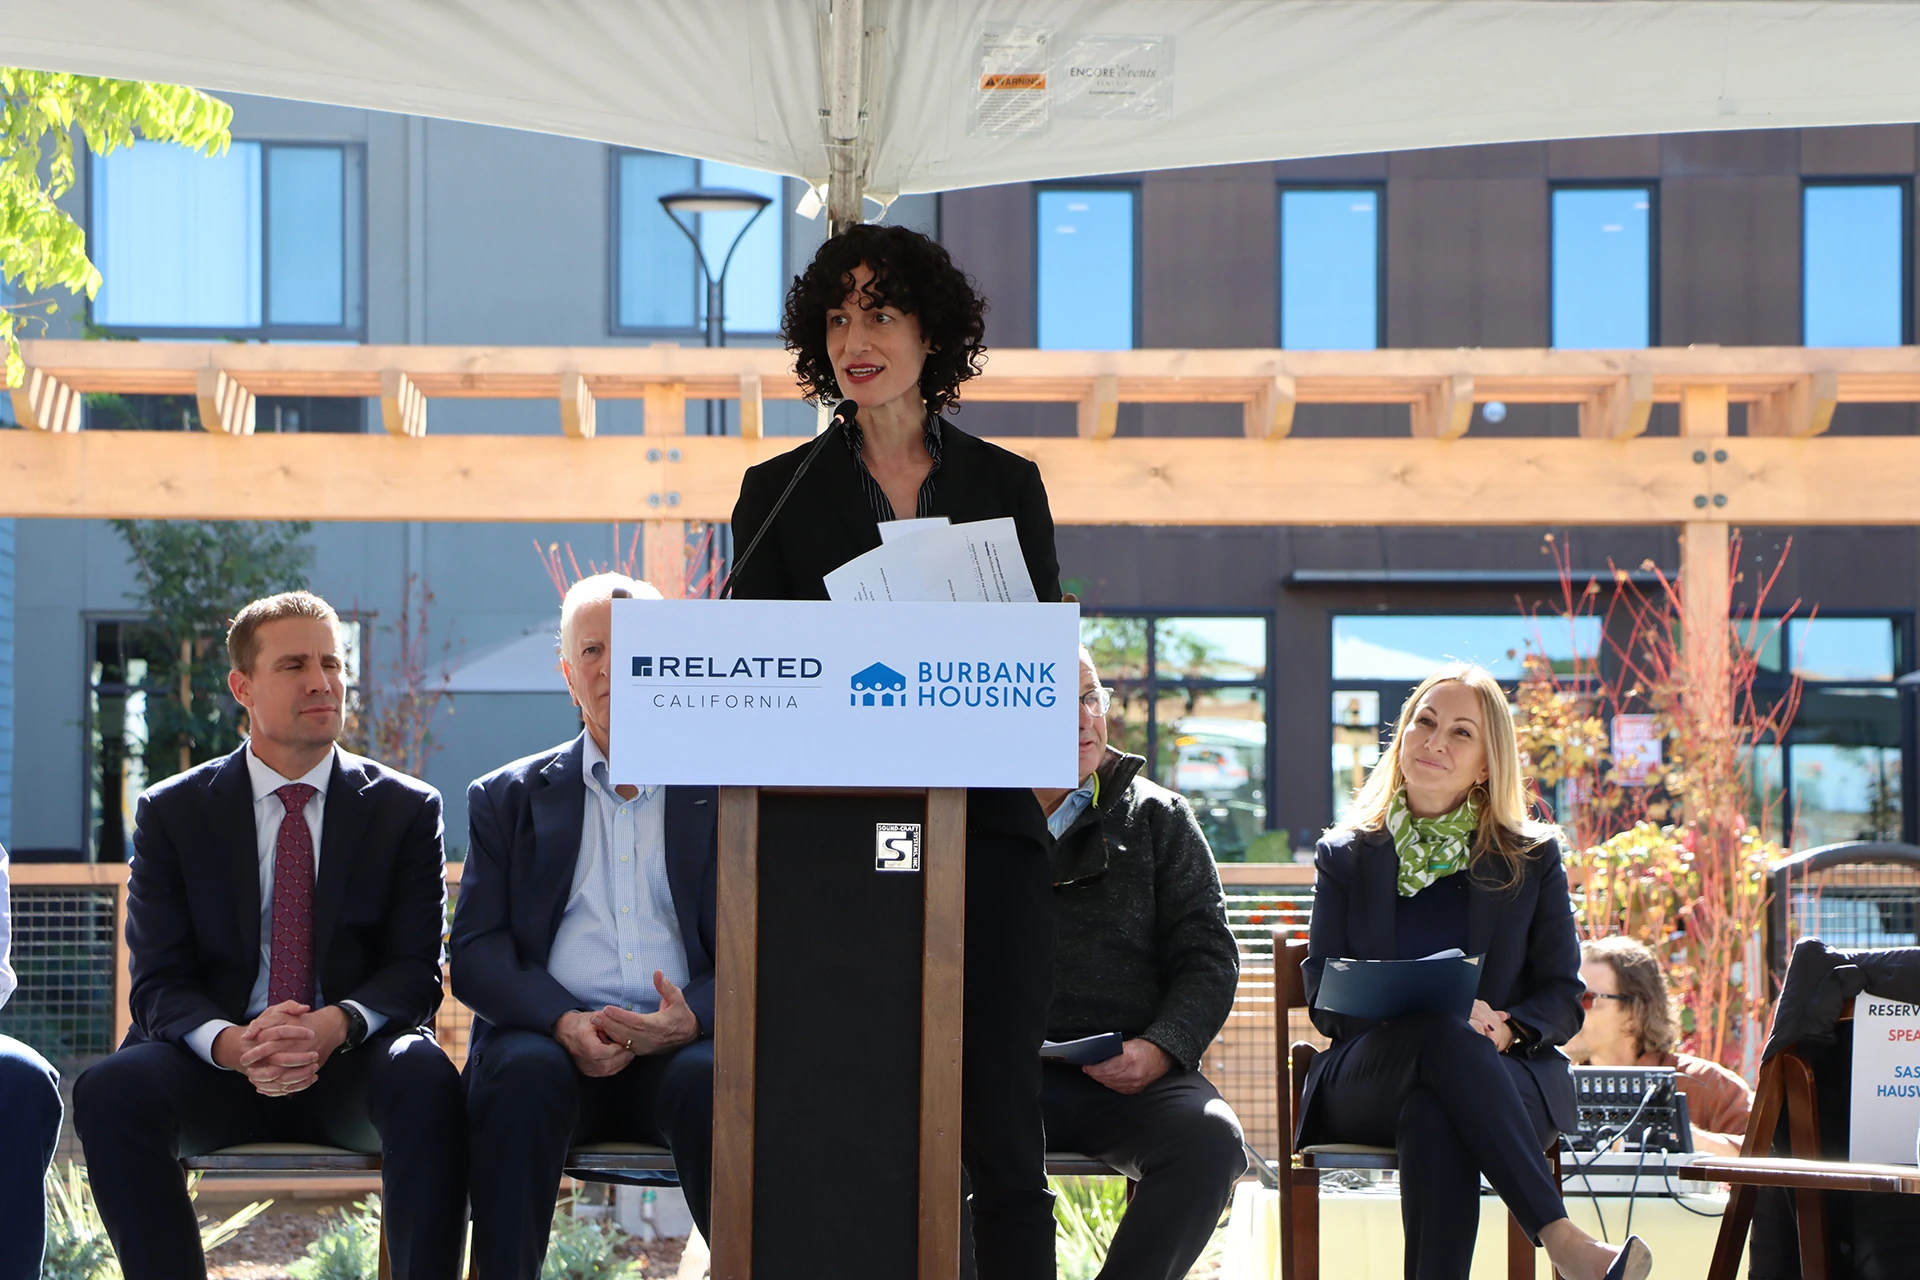 Photo of HCD Deputy Director Sasha Hauswald standing at a podium and speaking in front of Laurel at Perennial Park housing complex.